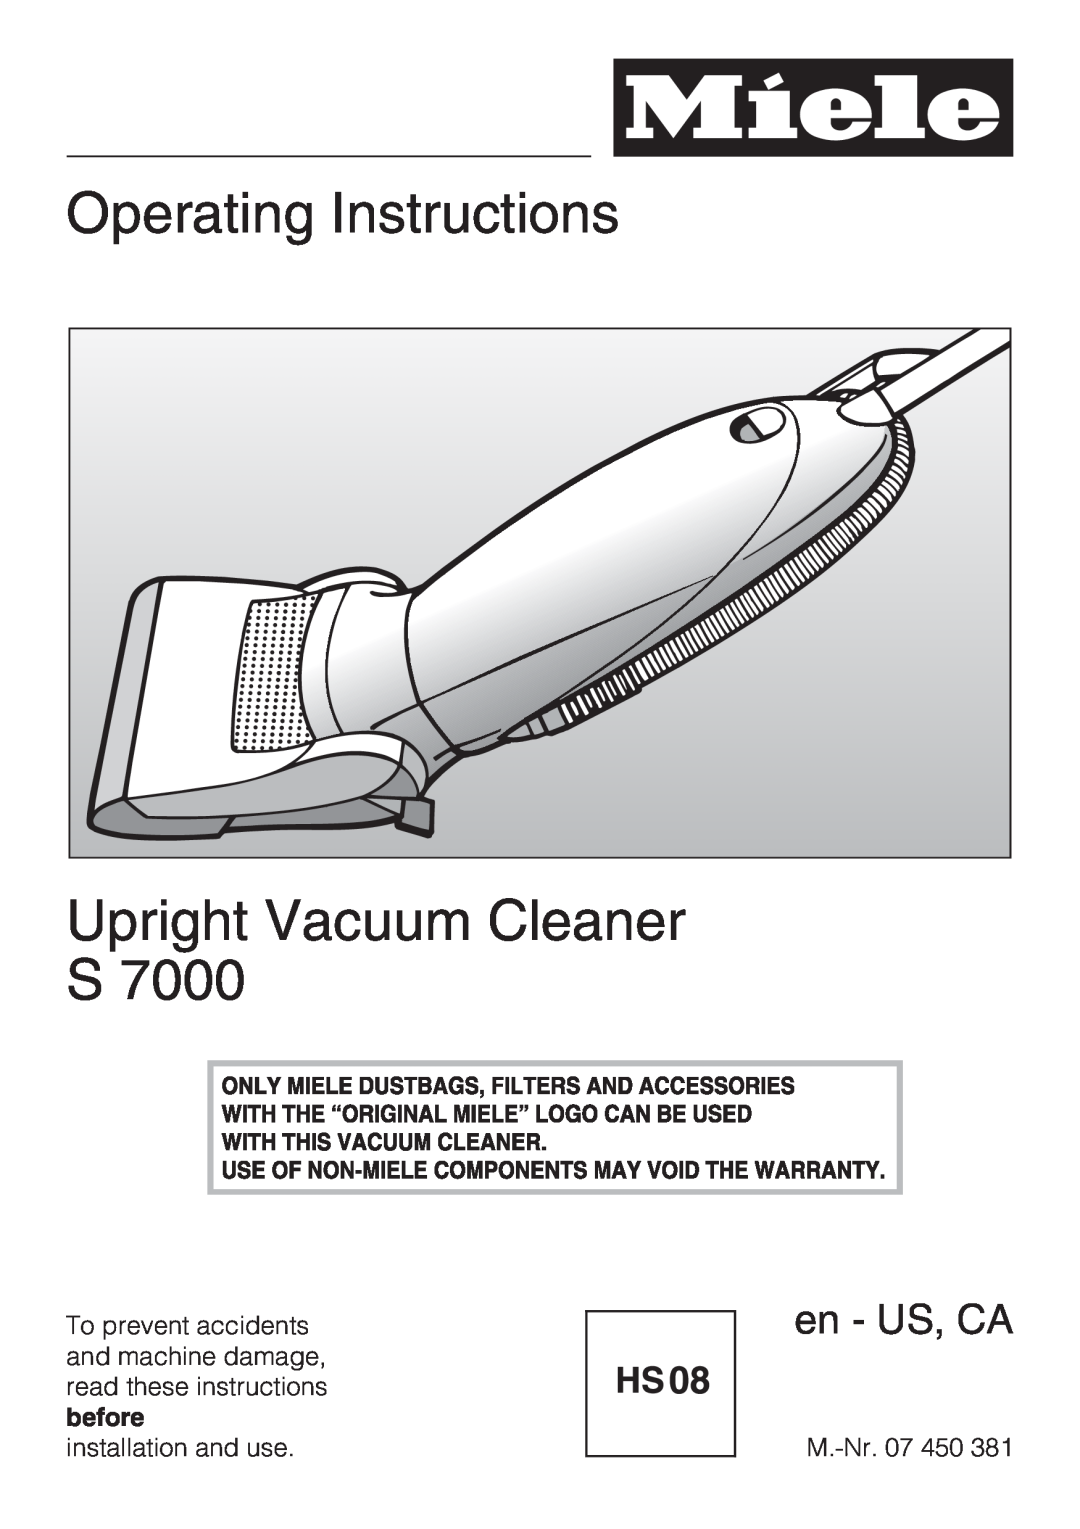 Miele S 7000 operating instructions Operating Instructions Upright Vacuum Cleaner S, en - US, CA 